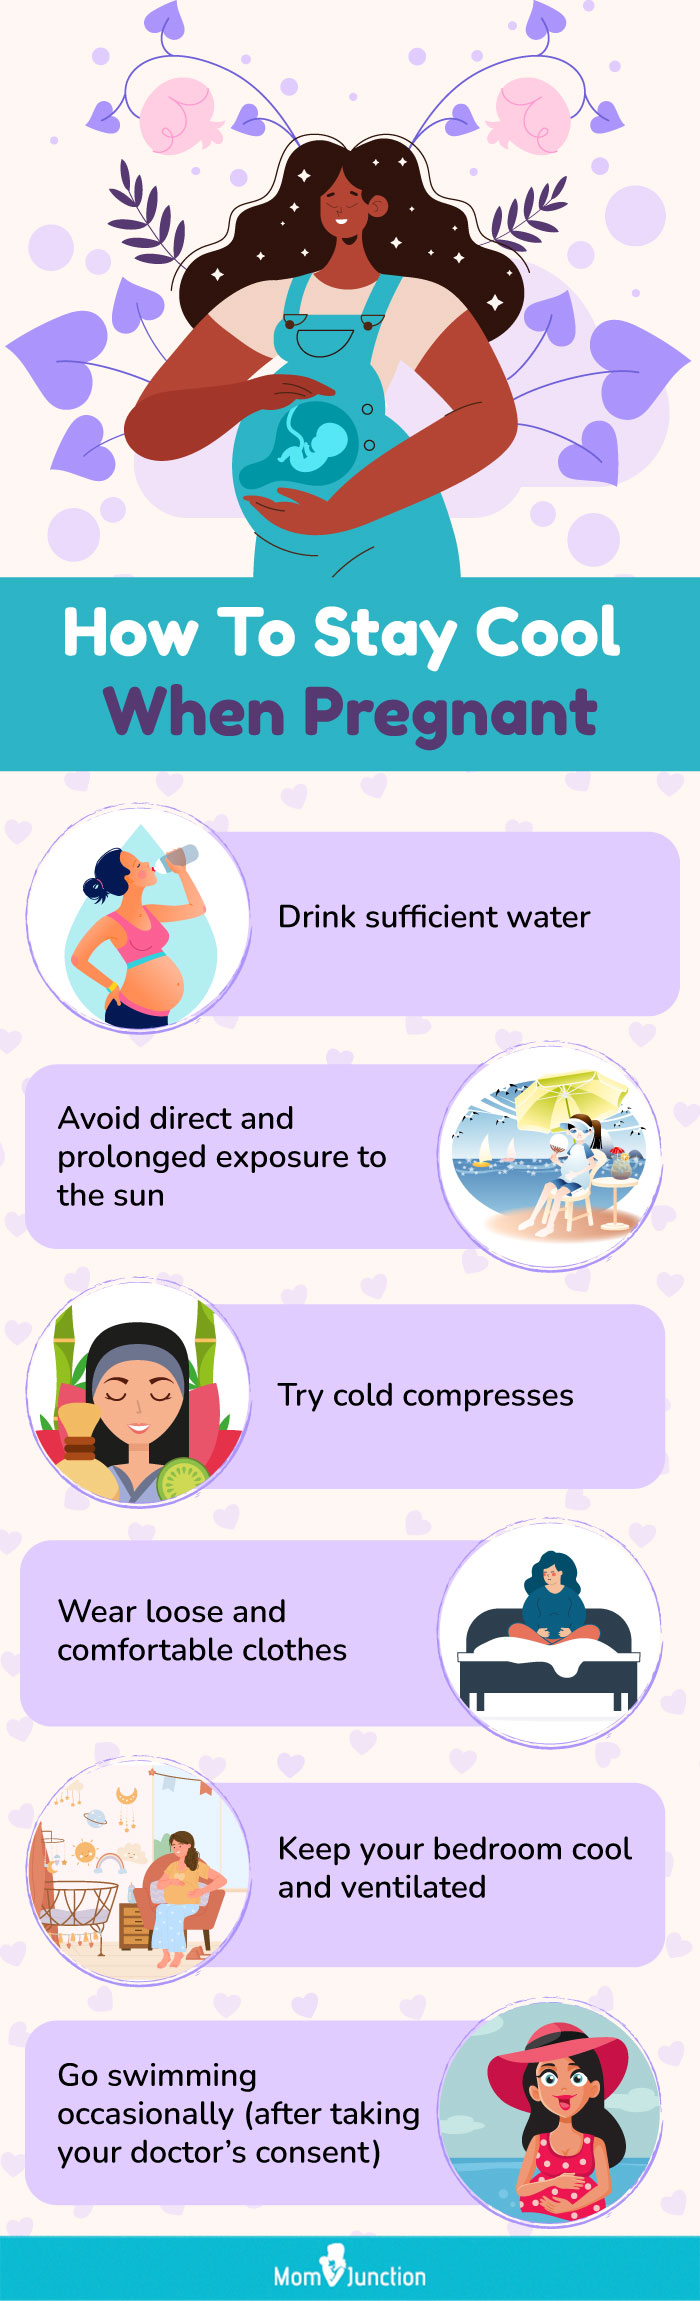 how to stay cool when pregnant (infographic)